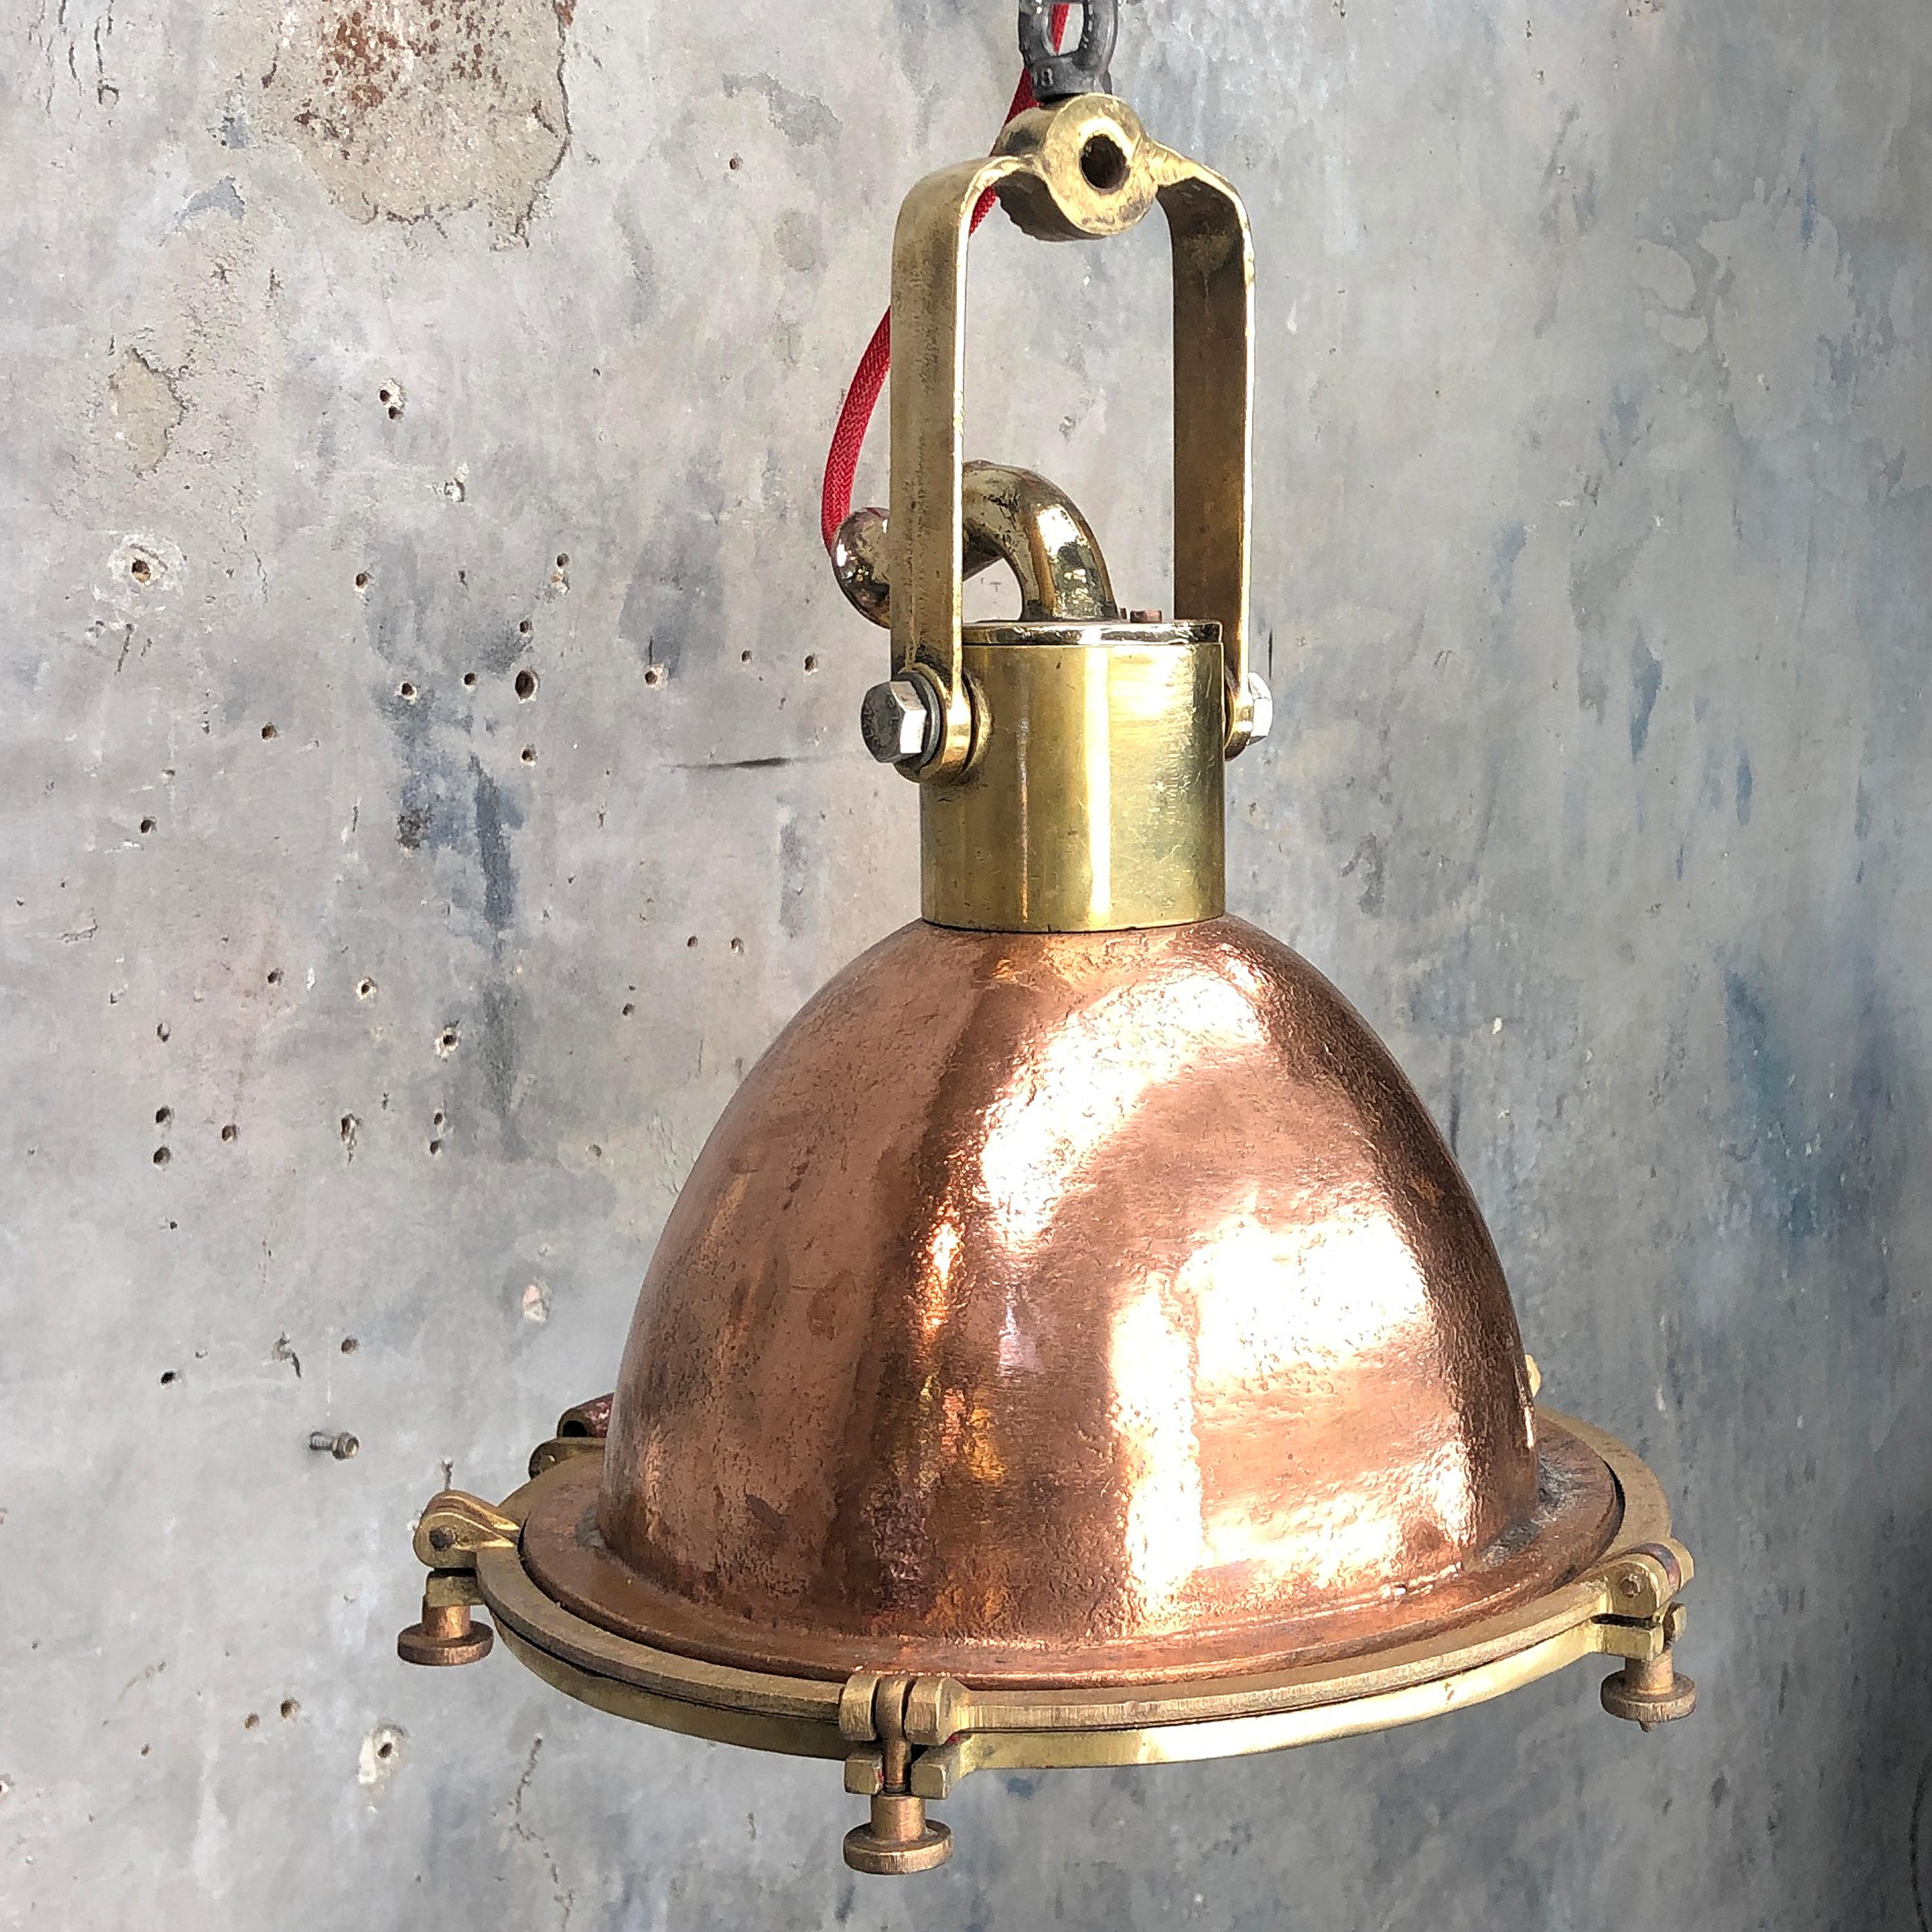 Mid-20th Century Midcentury German Copper, Cast Brass and Glass Industrial Marine Pendant Light